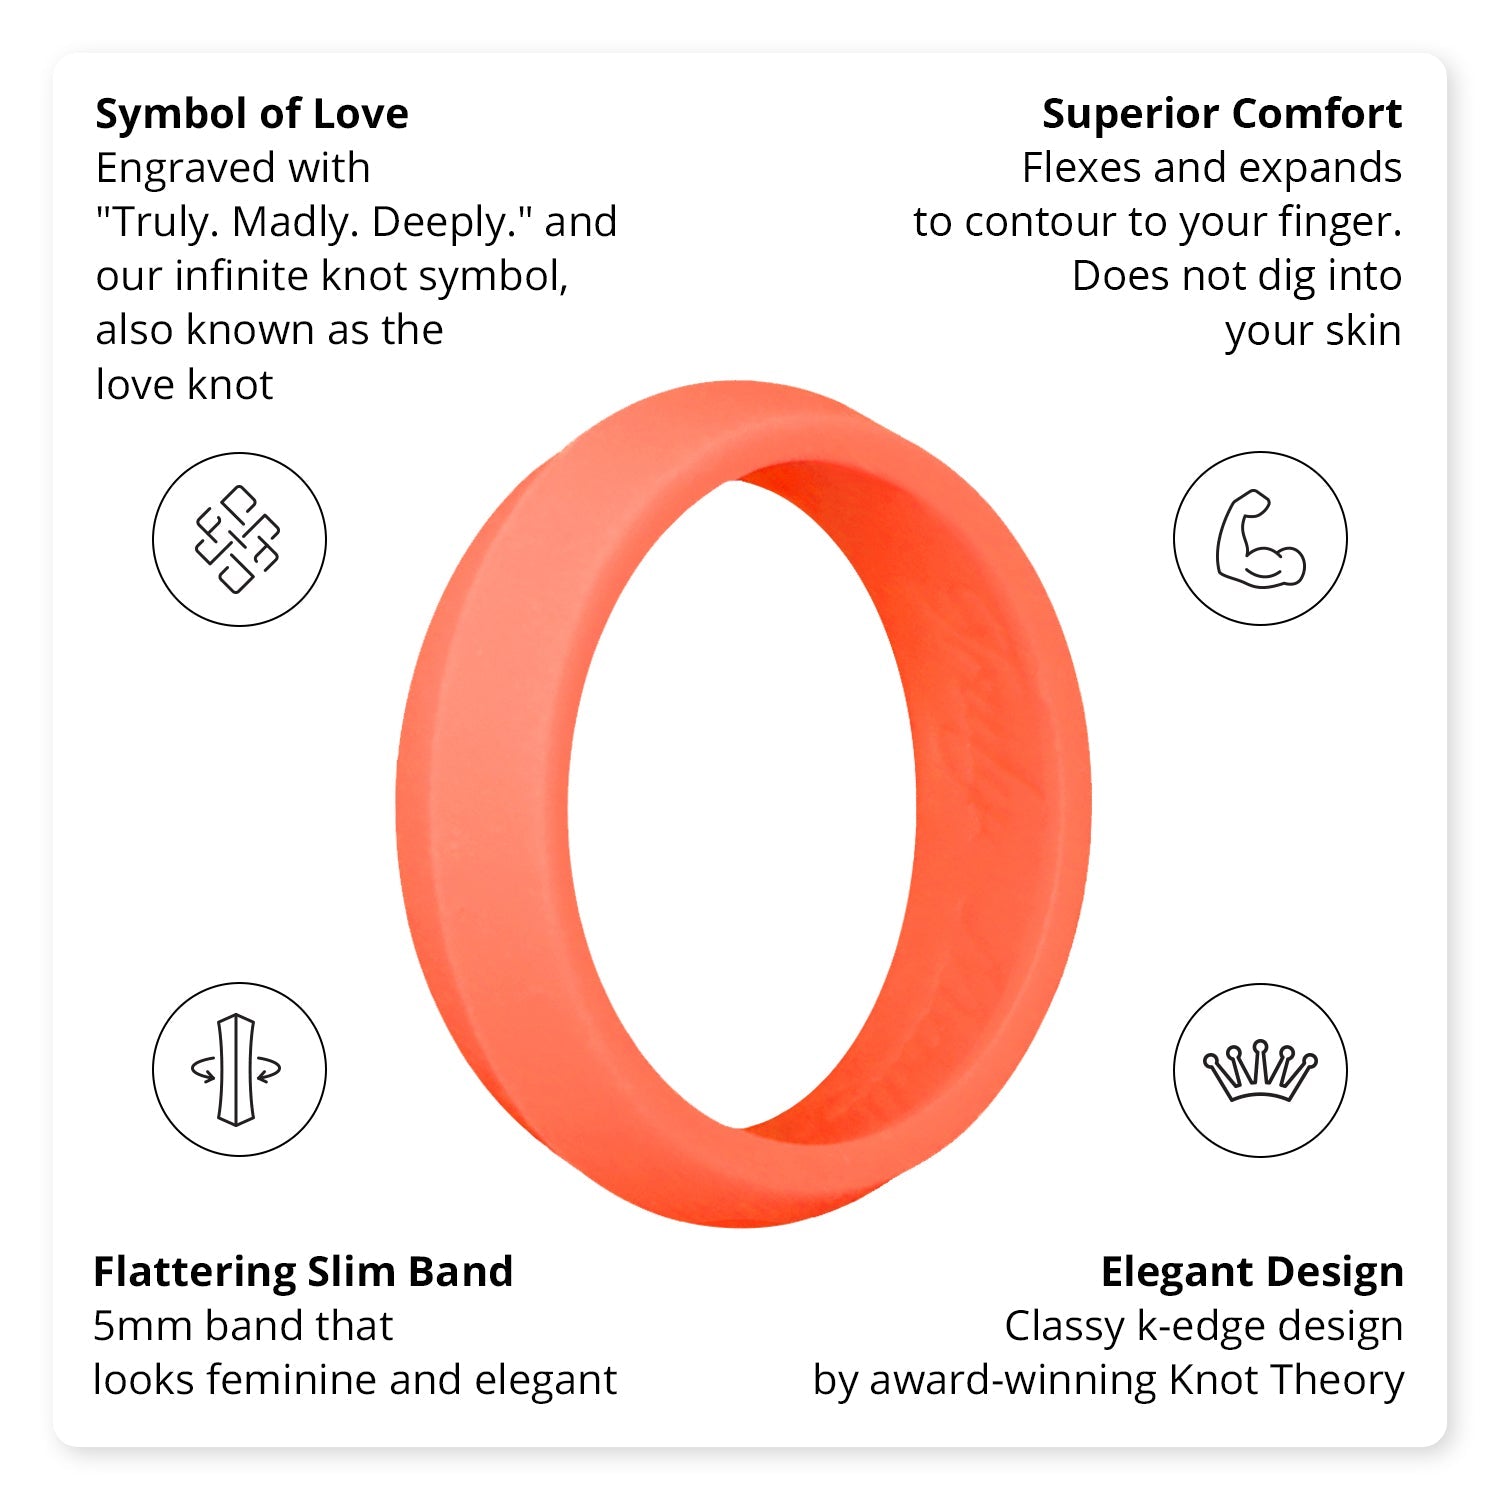 Coral Pink Orange K-Edge Silicone Ring For Women - Knot Theory